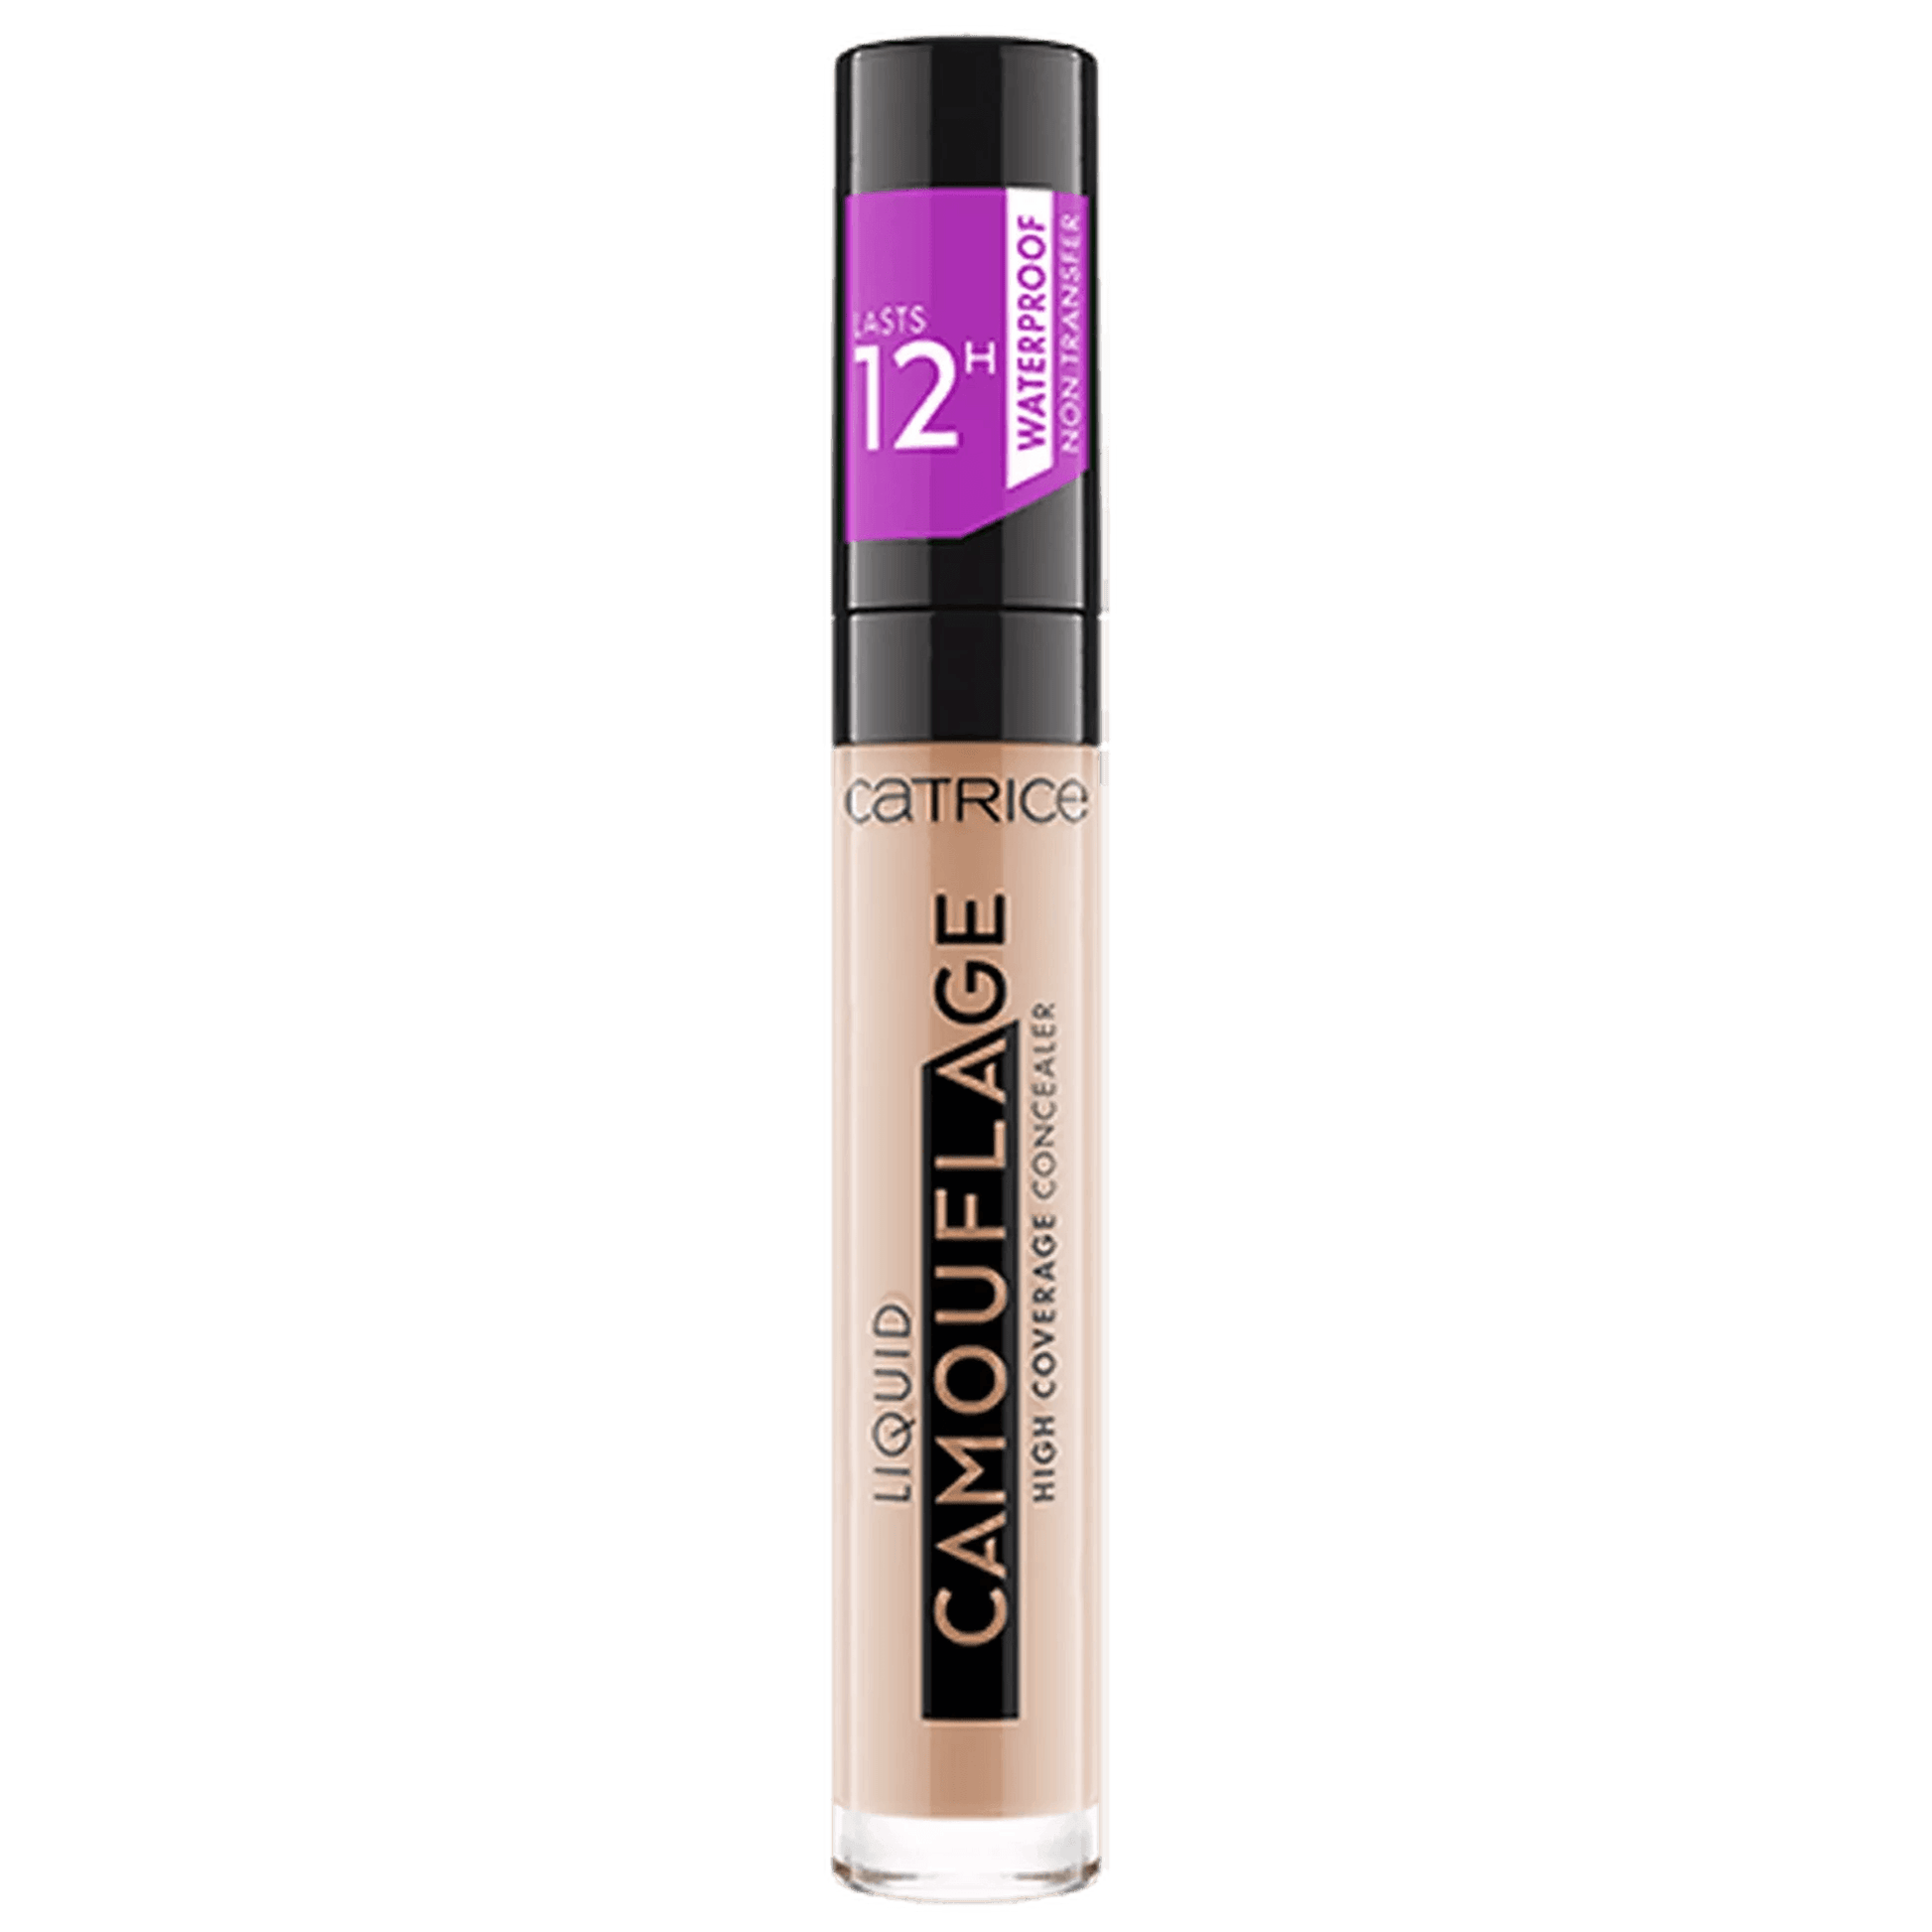 Catrice Liquid Camouflage High Coverage Concealer 020 Light Beige - Beauty Bounty